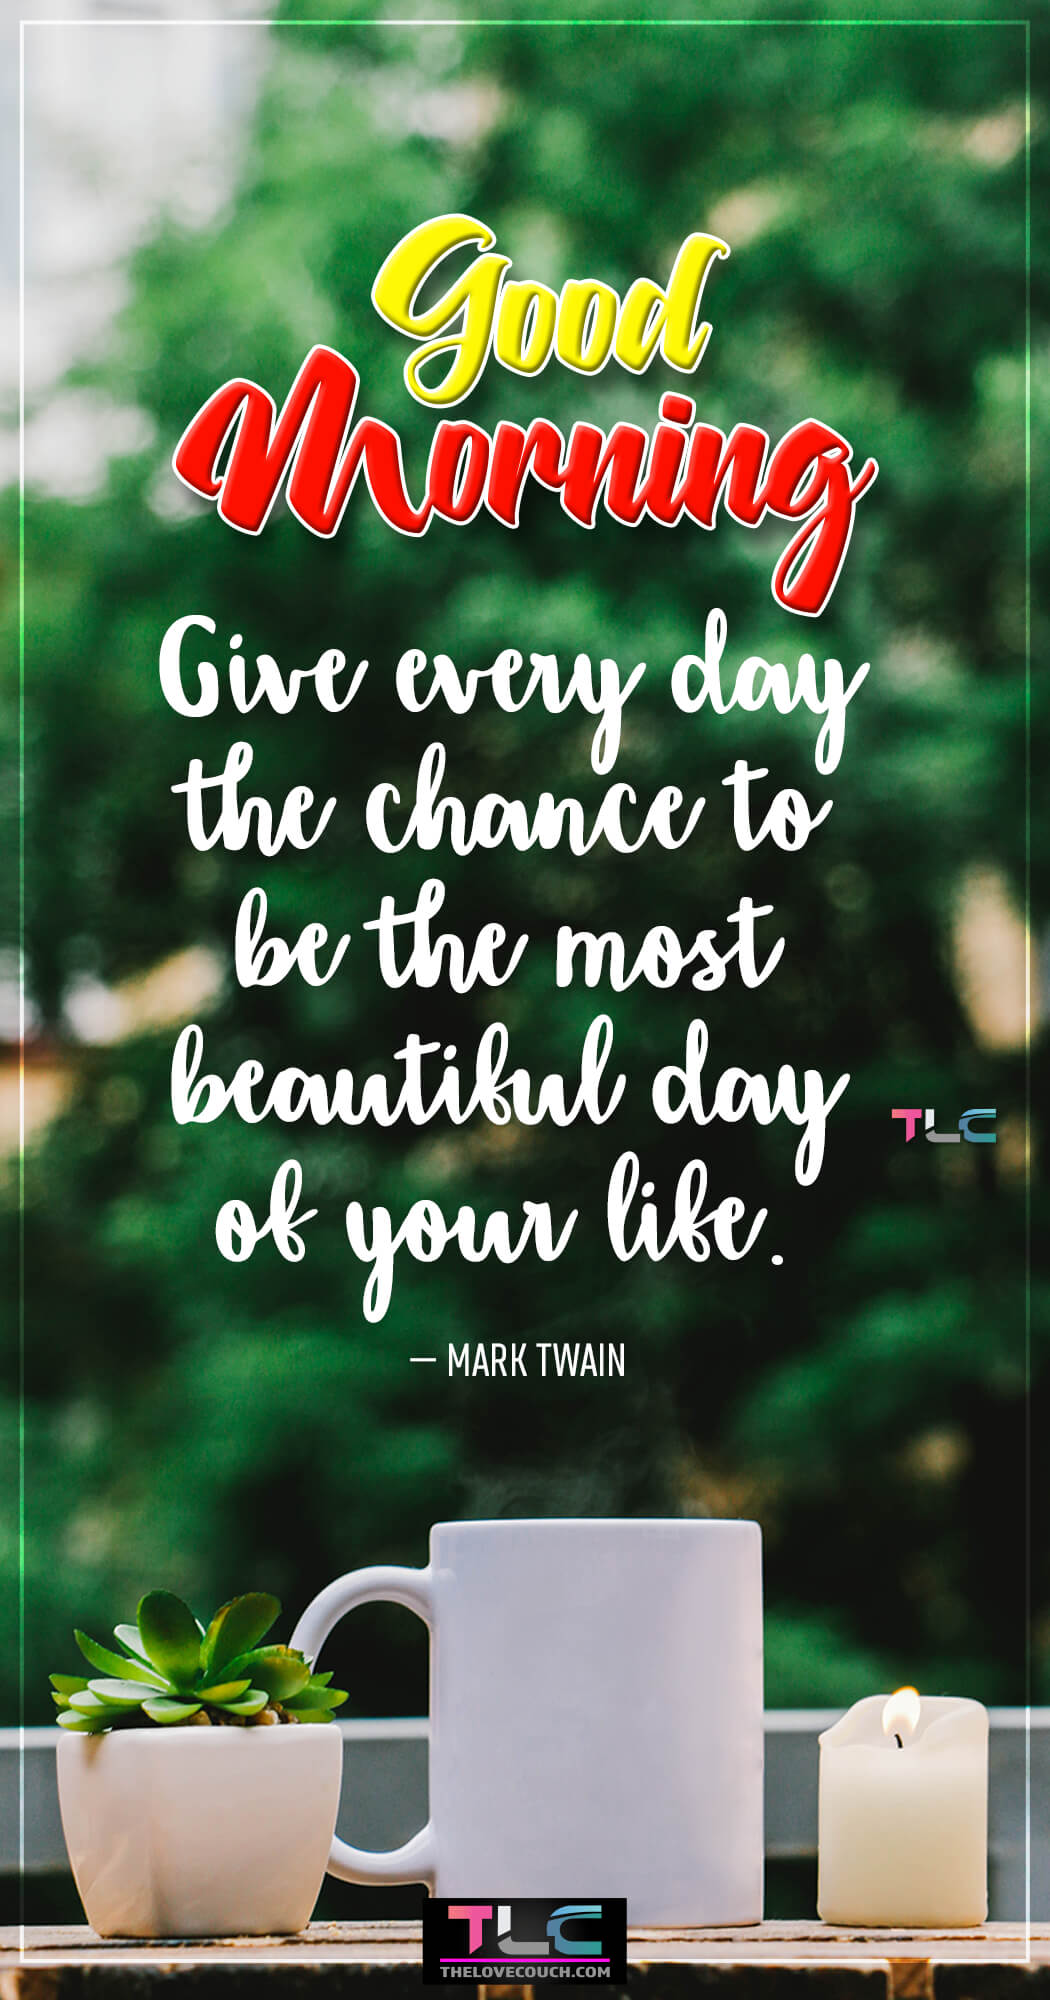 Give every day the chance to be the most beautiful day of your life. — Mark Twain